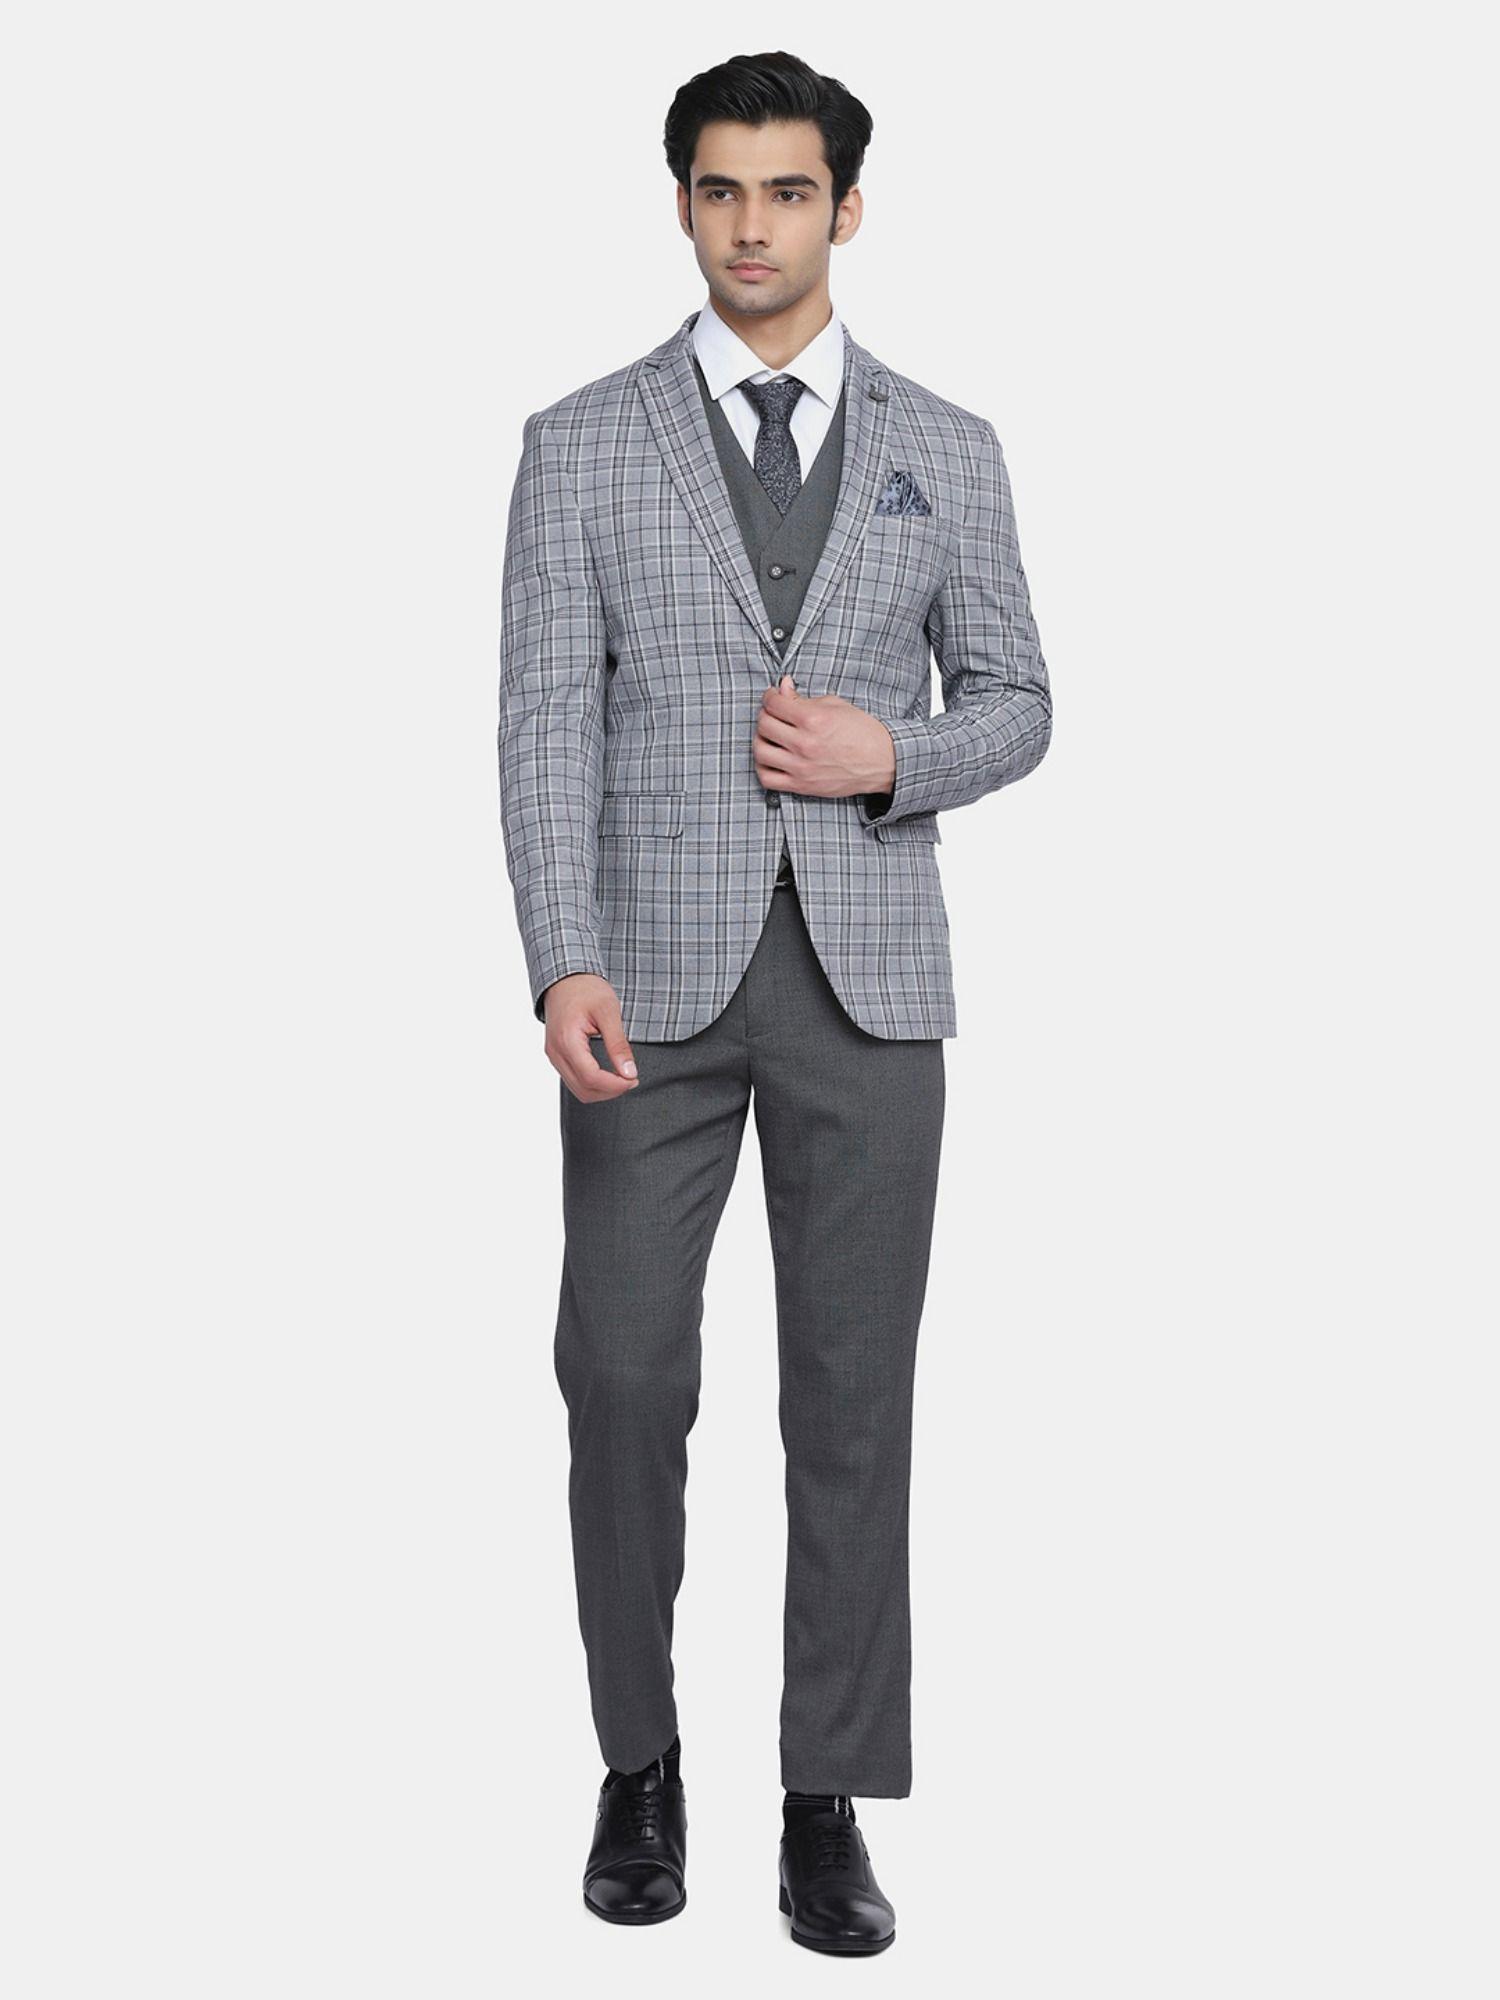 grace-6x-check-suits-in-grey